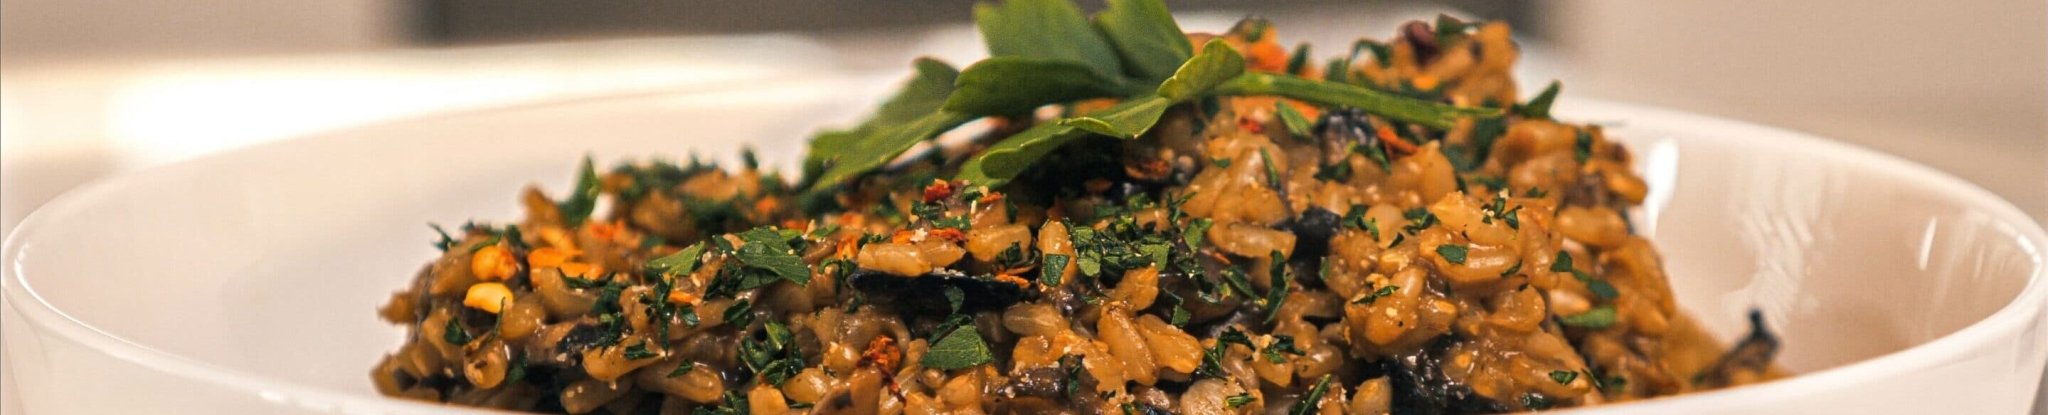 Mouth-watering Mushroom Risotto | Recipe